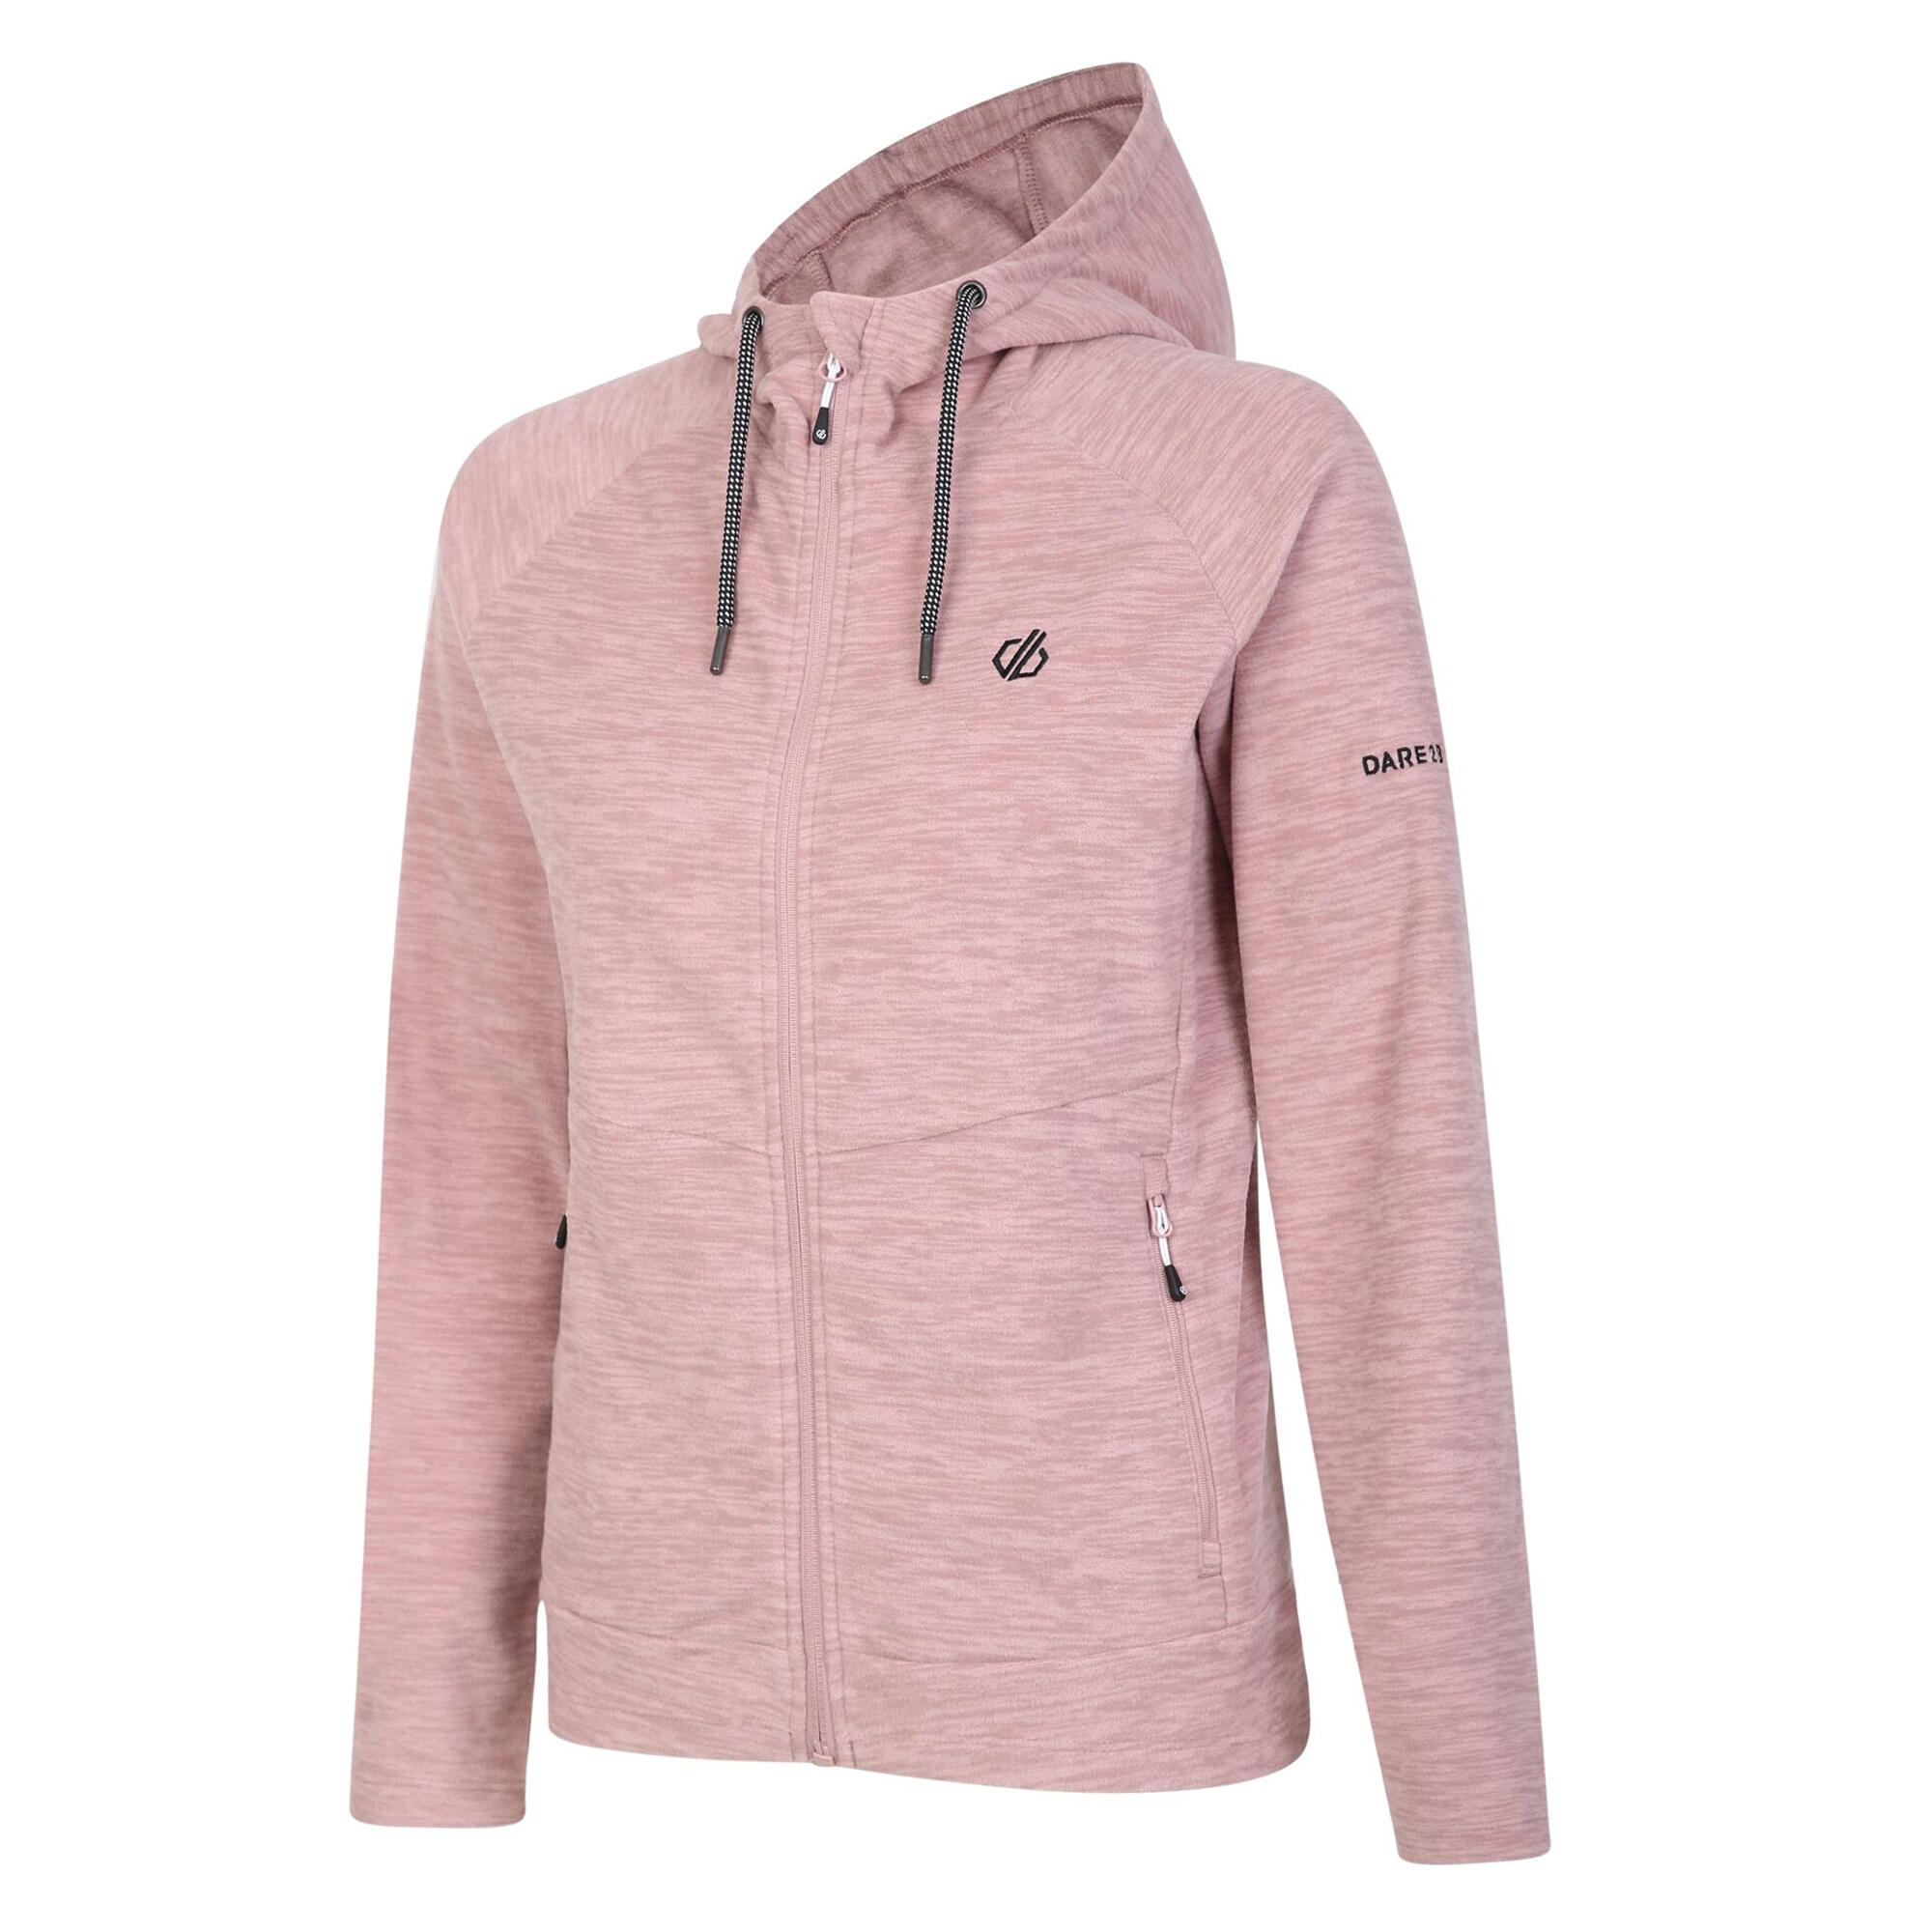 Womens/Ladies Out & Out Marl Full Zip Fleece Jacket (Dusky Rose) 3/4